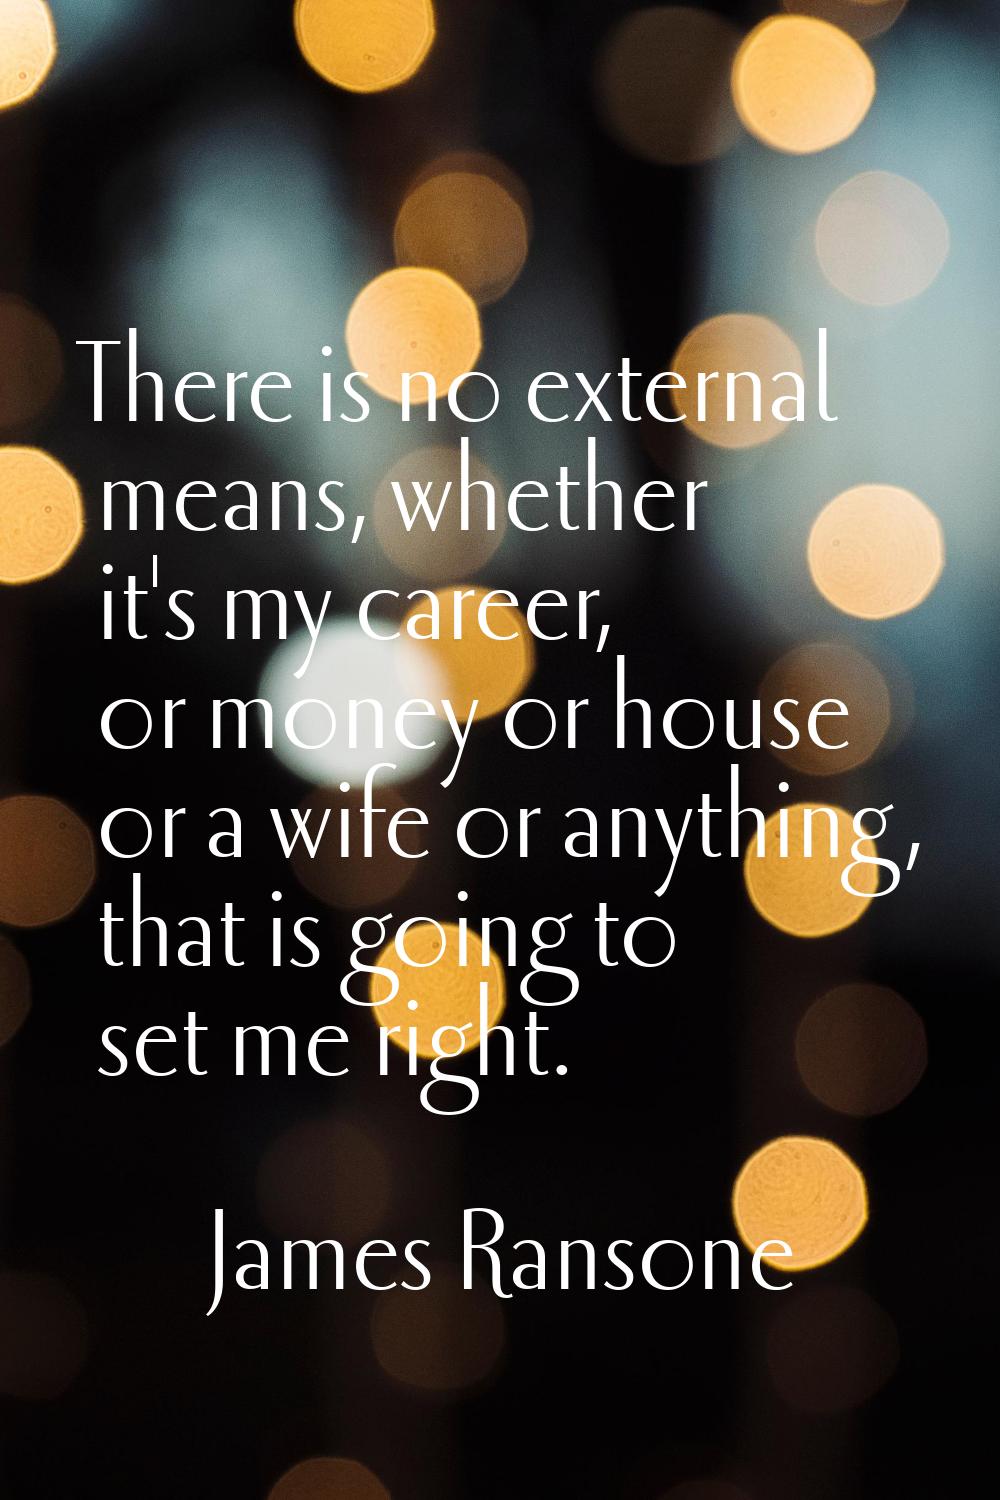 There is no external means, whether it's my career, or money or house or a wife or anything, that i